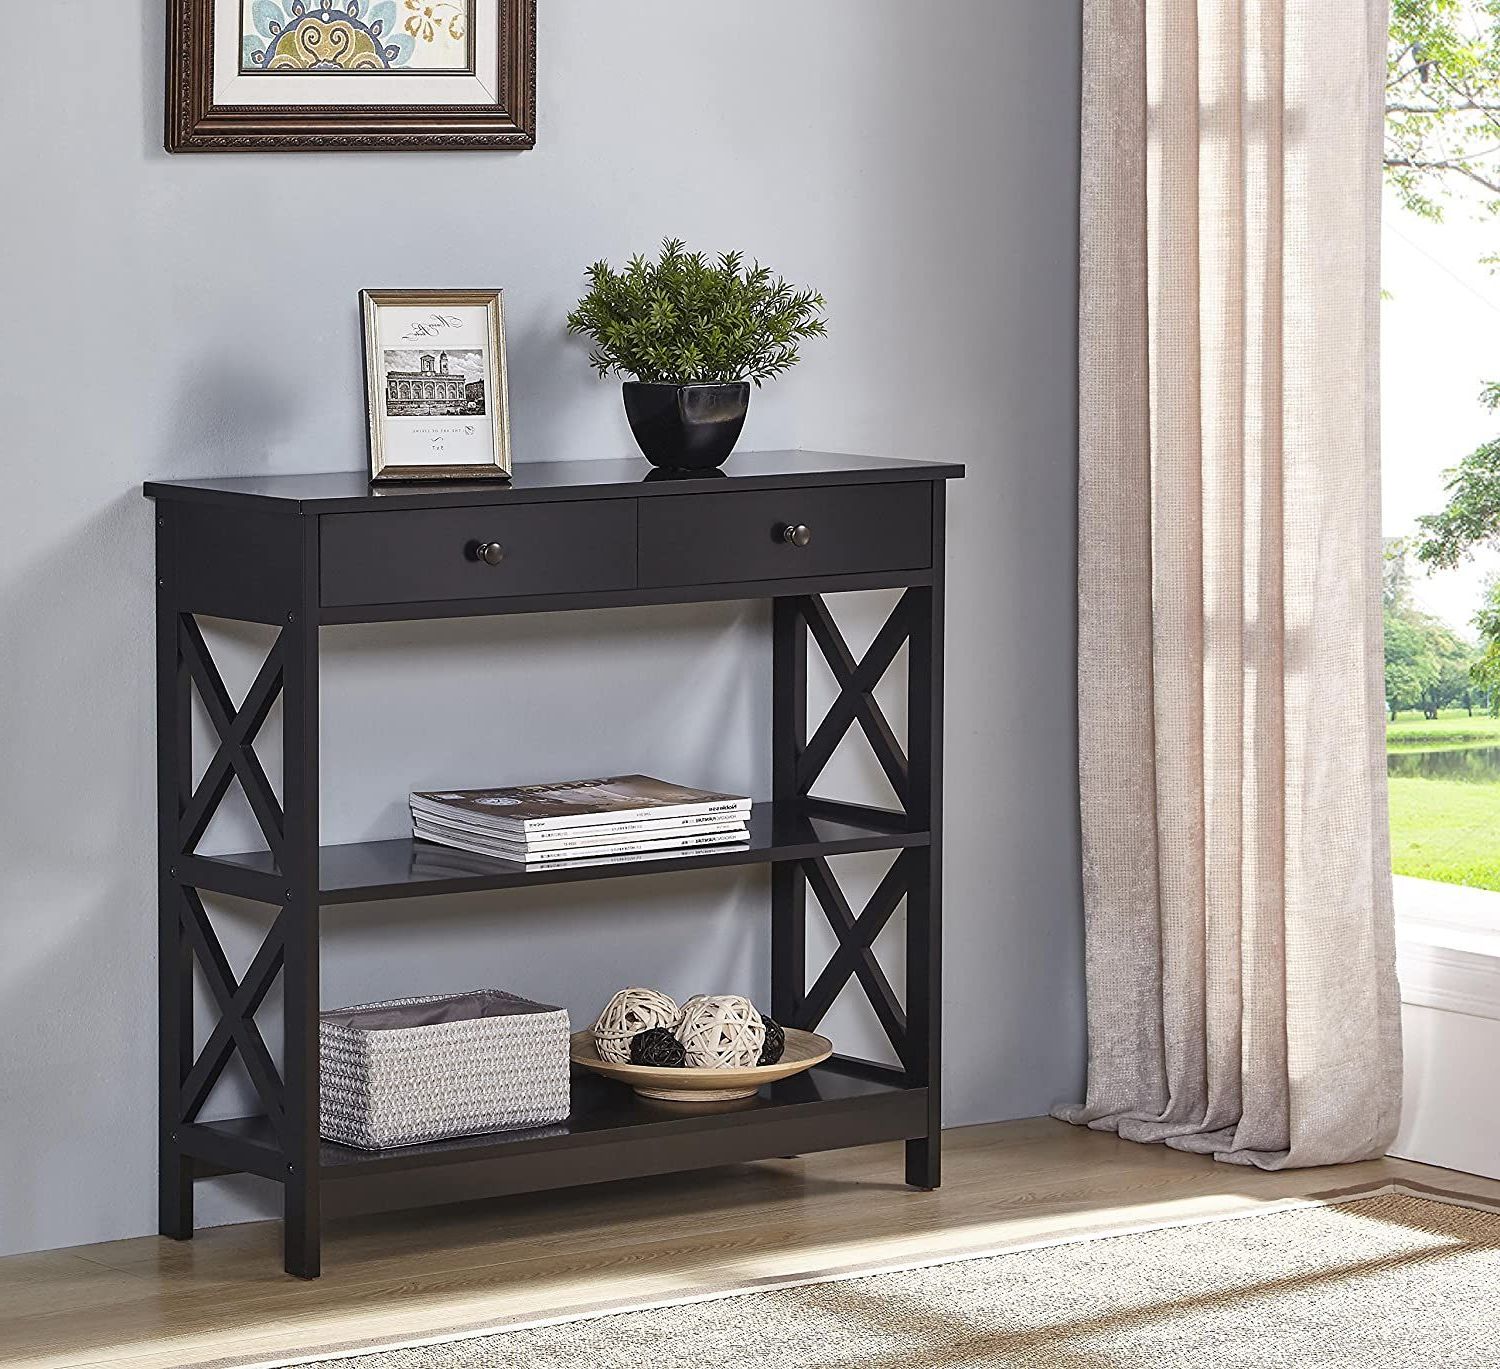 Black Finish 3 Tier Console Sofa Entry Table With Shelf With Well Liked 3 Tier Console Tables (View 2 of 10)